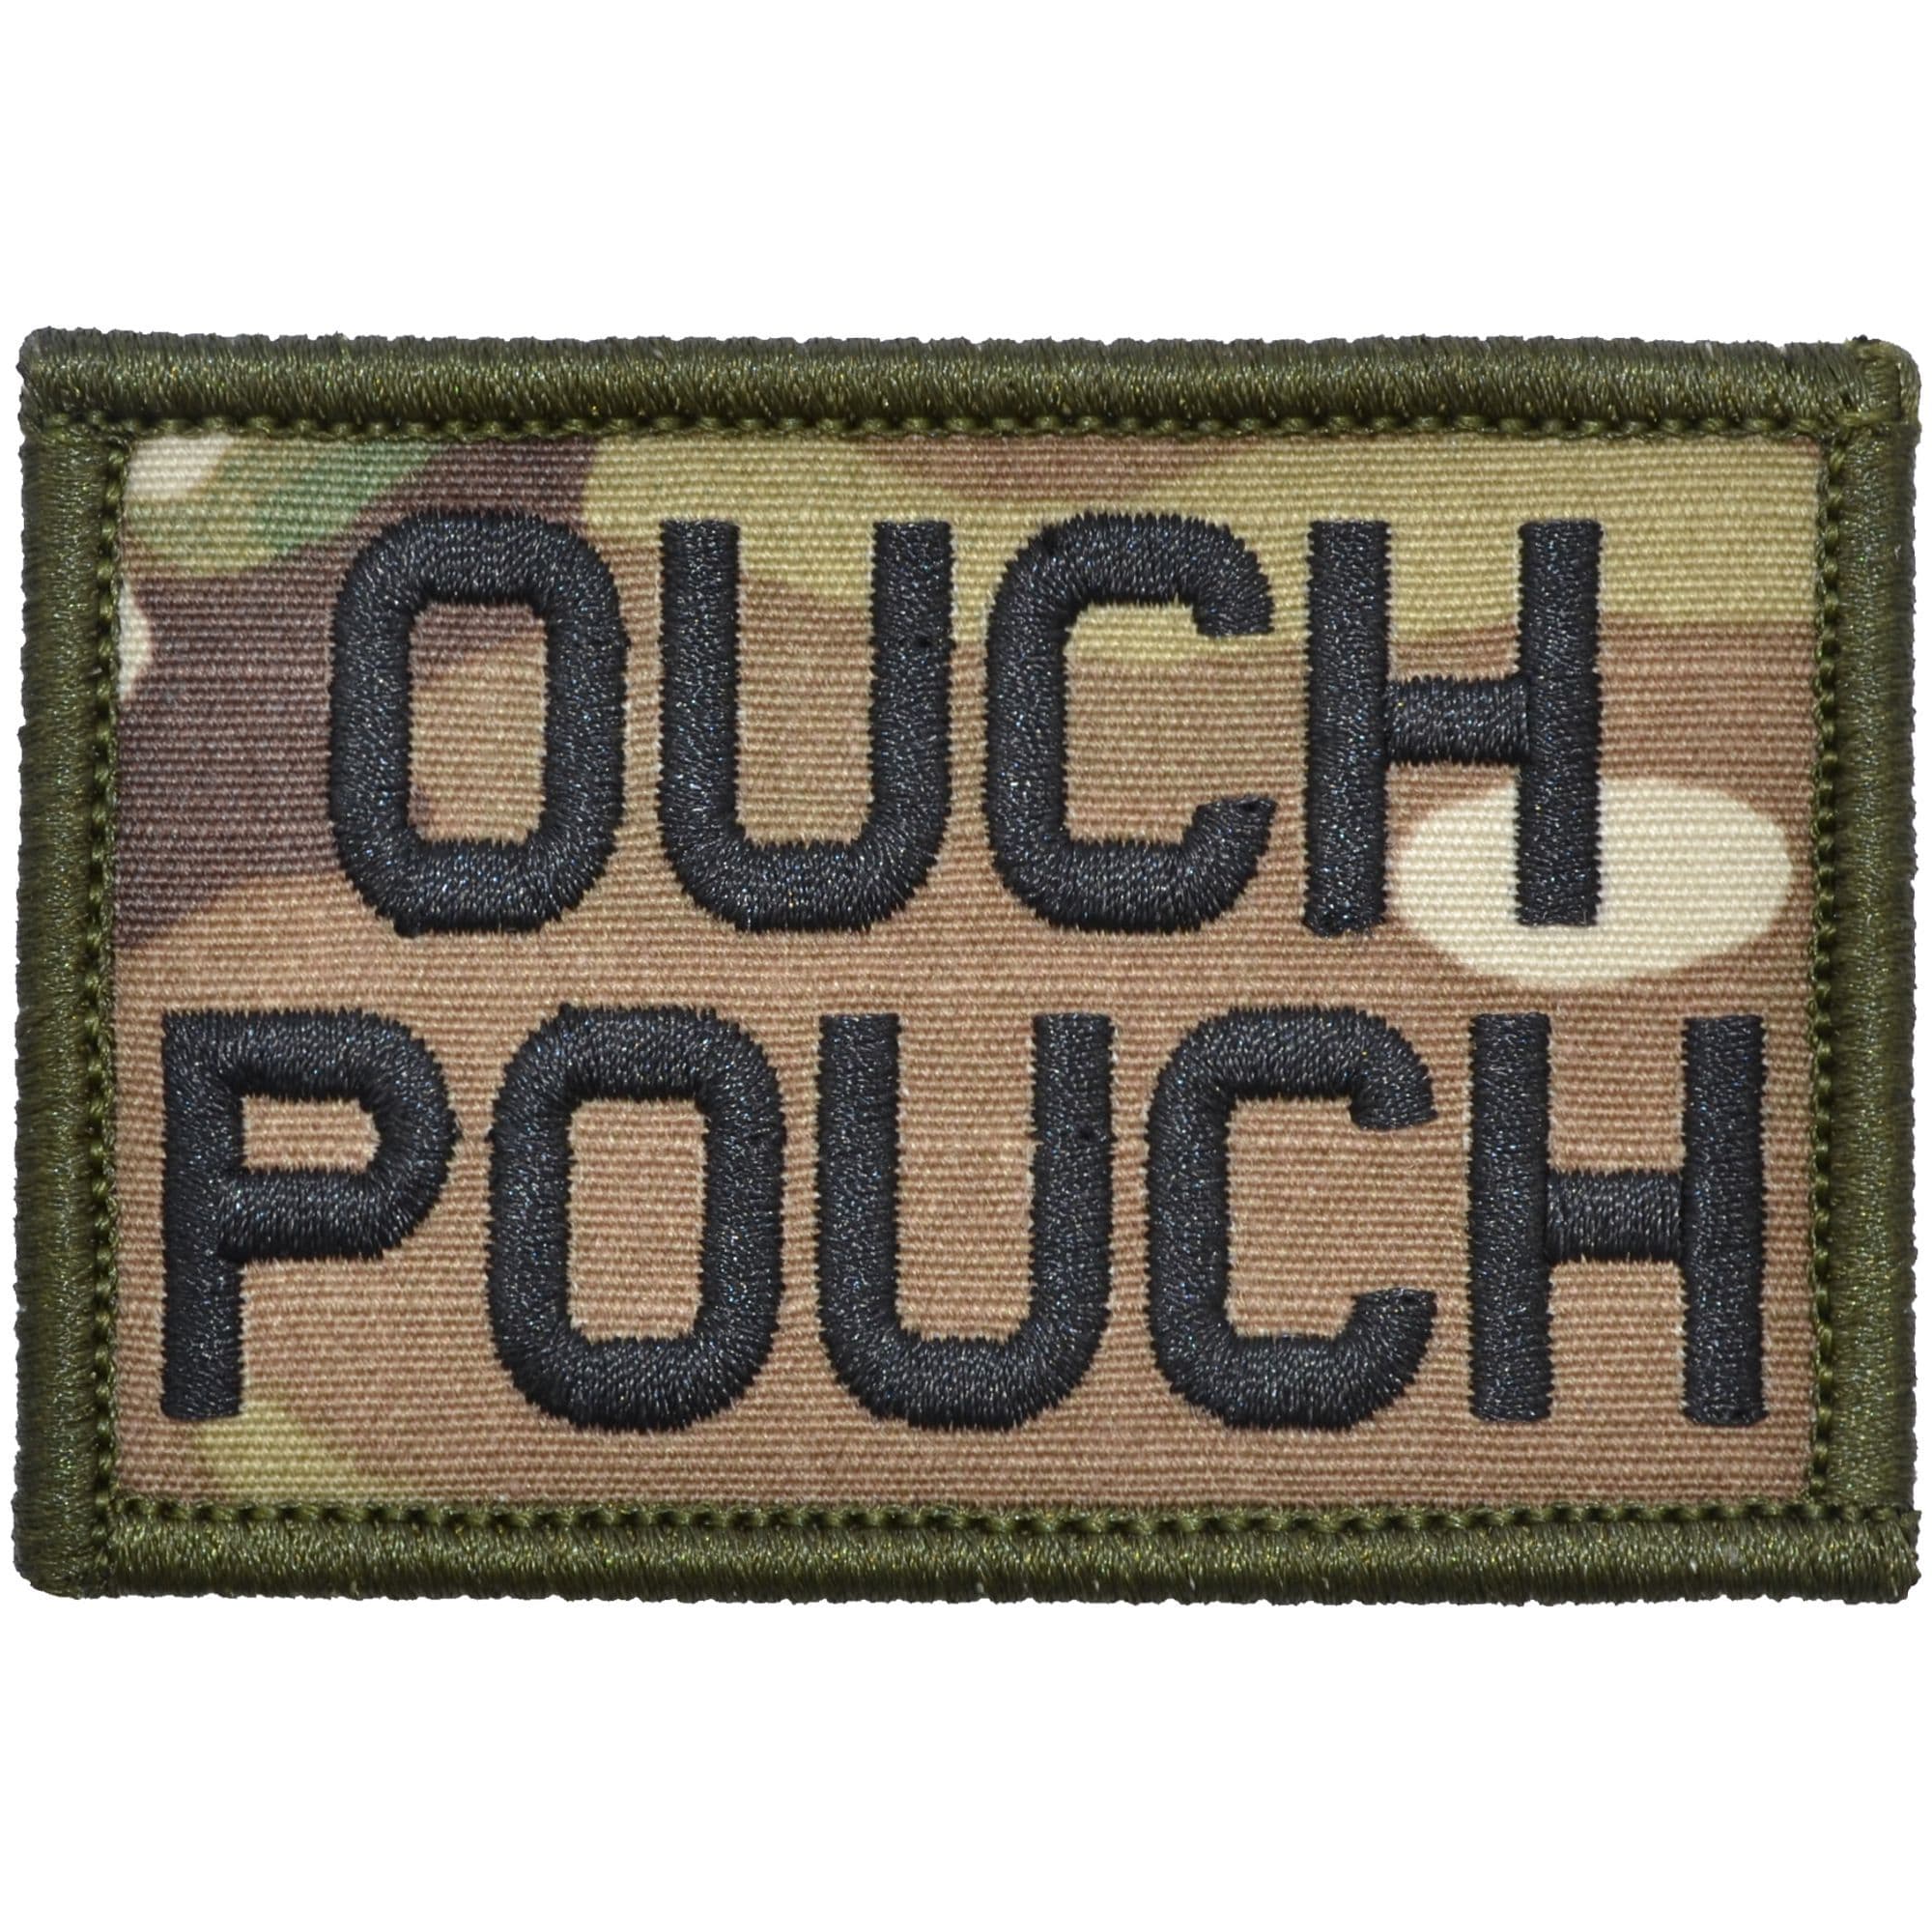 Tactical Gear Junkie Patches MultiCam Ouch Pouch - 2x3 Patch